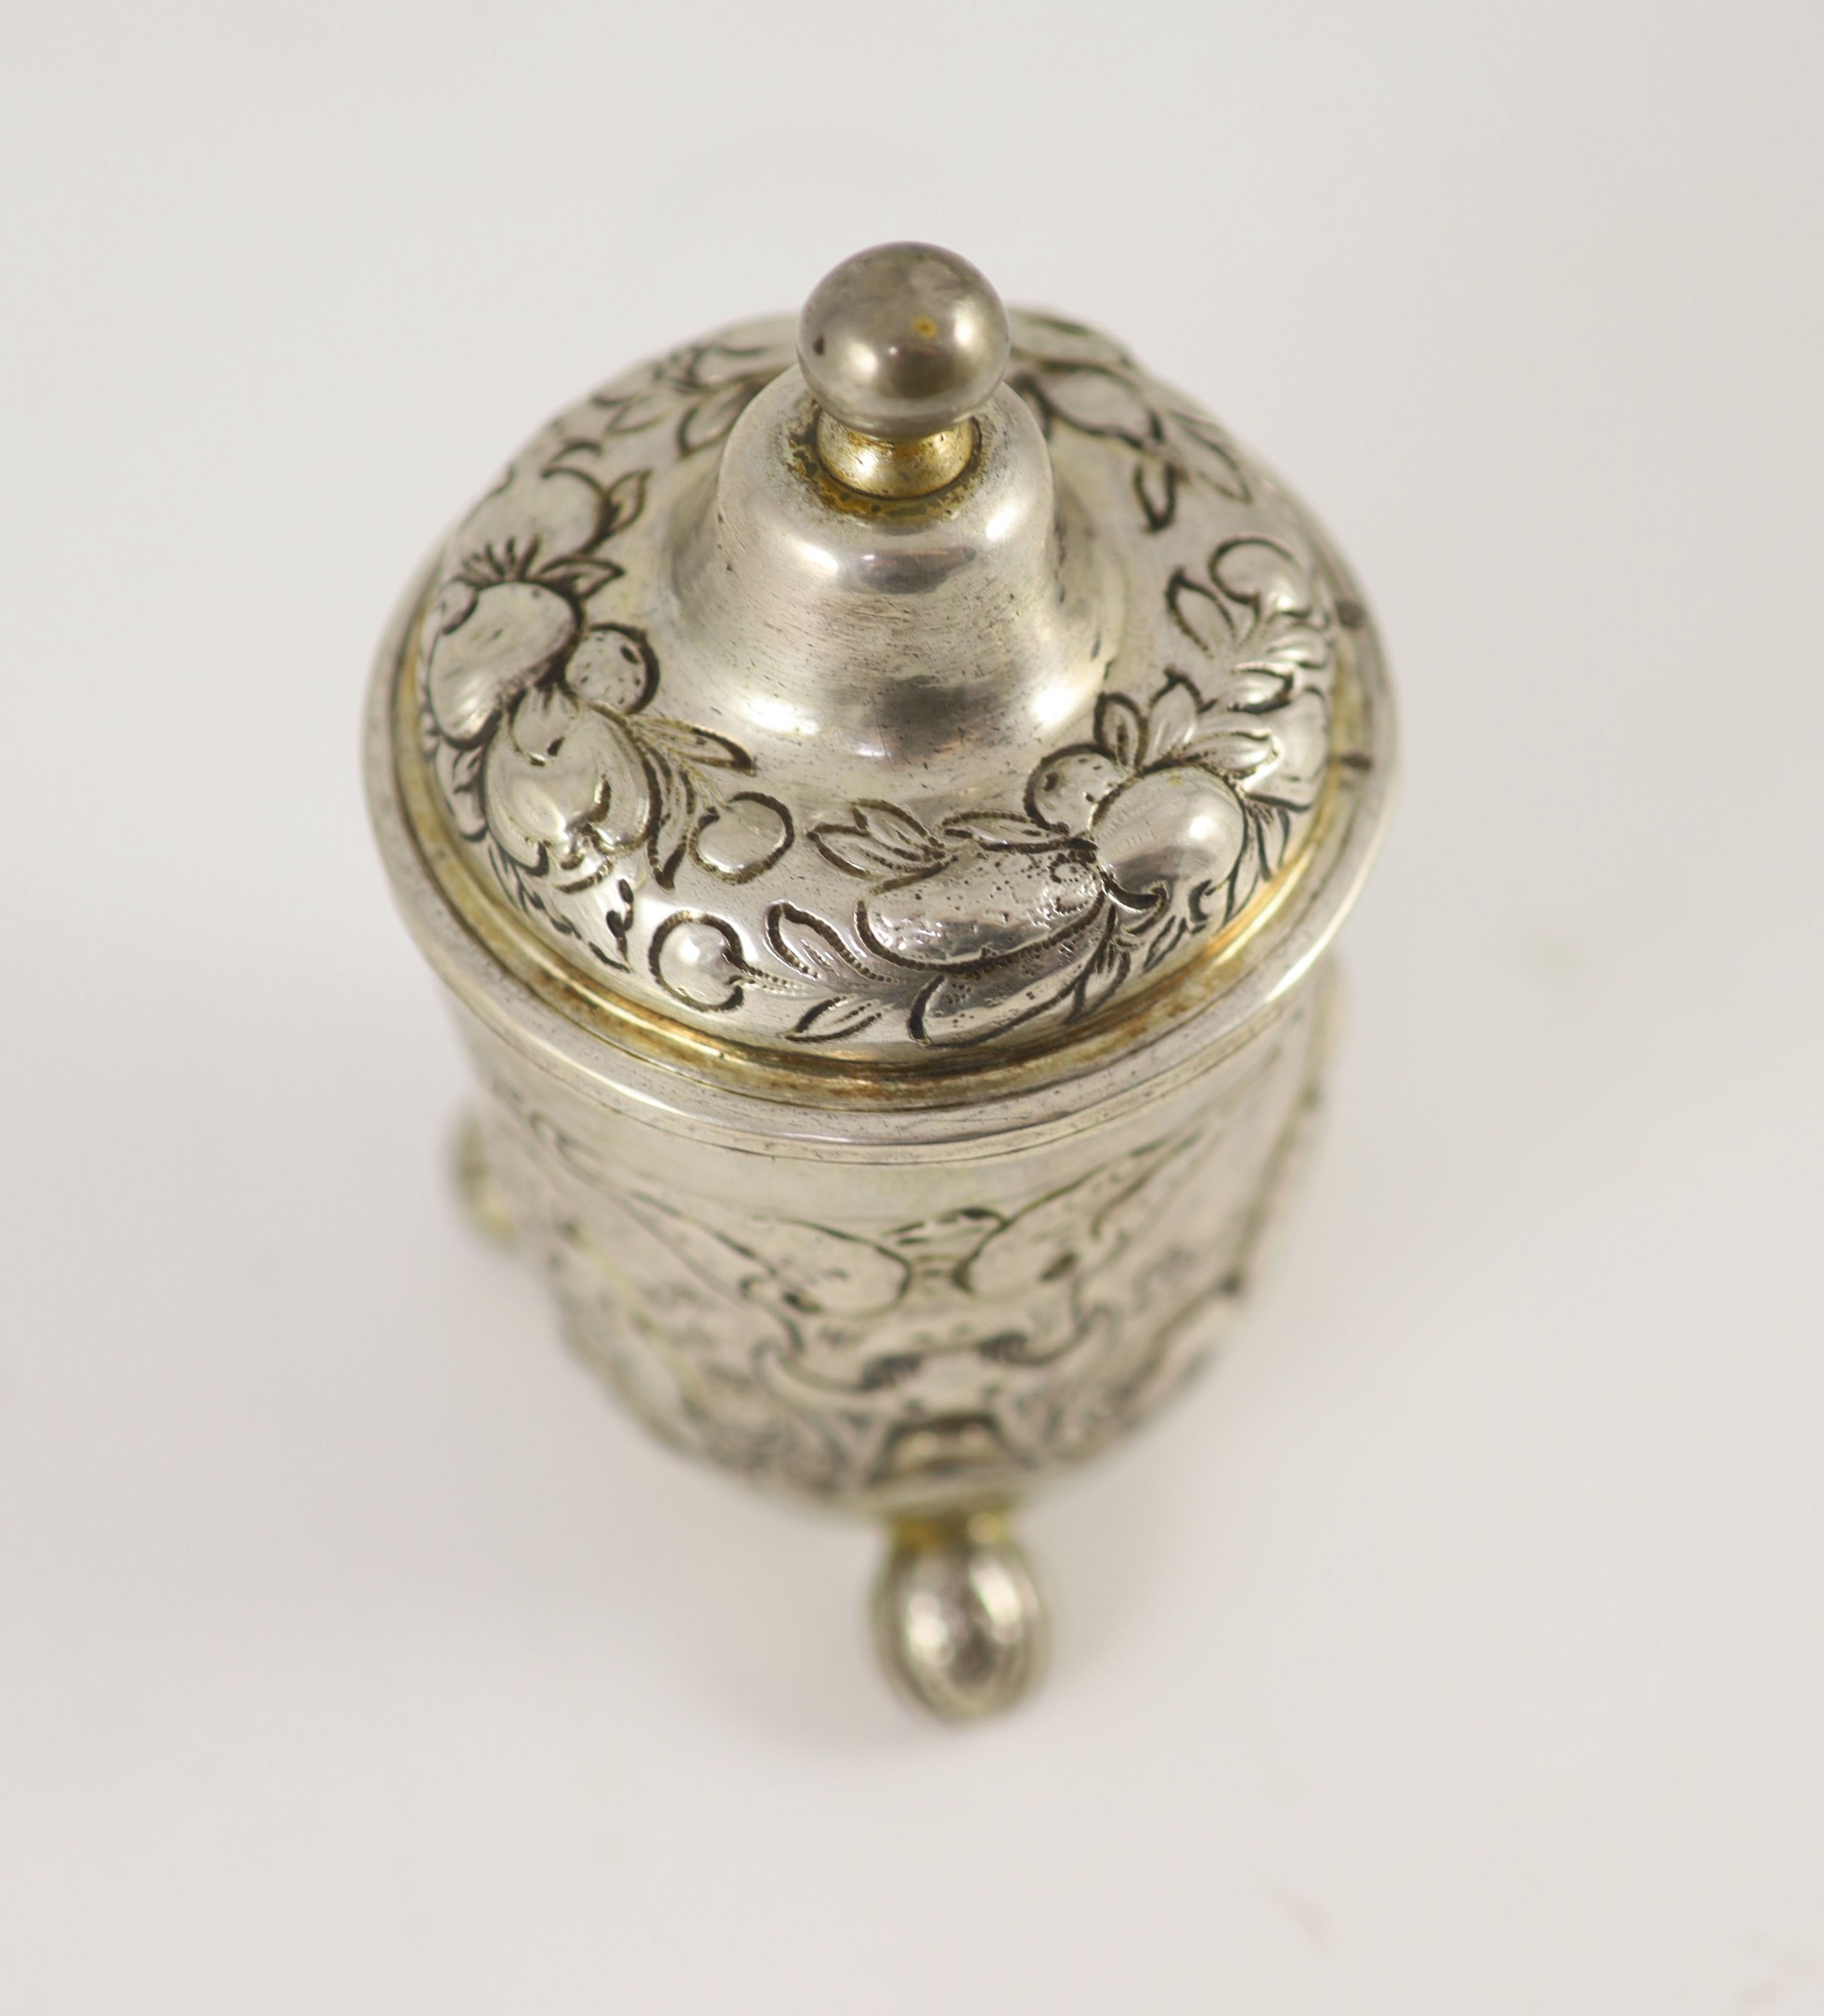 An 18th century possibly German silver cup and cover